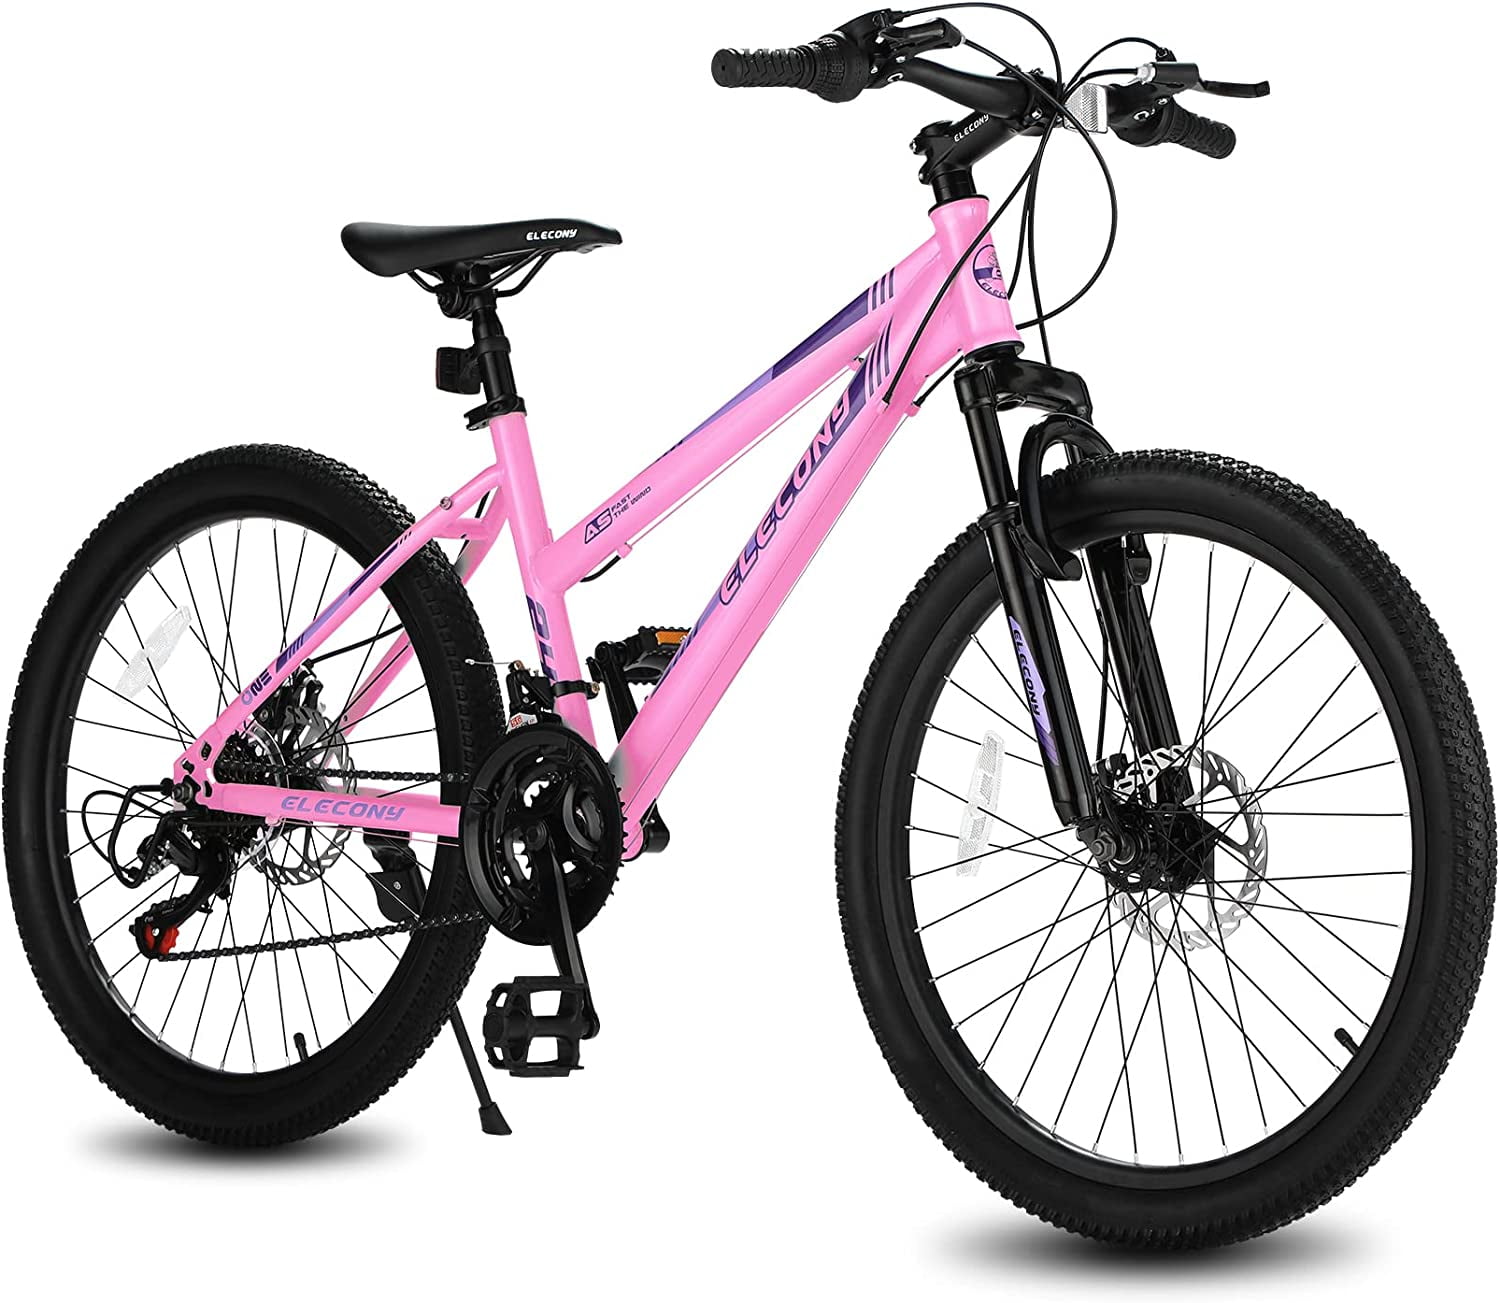 Elecony 26 inch Mountain Bike for Girls Women, Shimano 21 Gear MTB with Dual Disc Brakes and 100mm Front Suspension, White/Pink Walmart.com